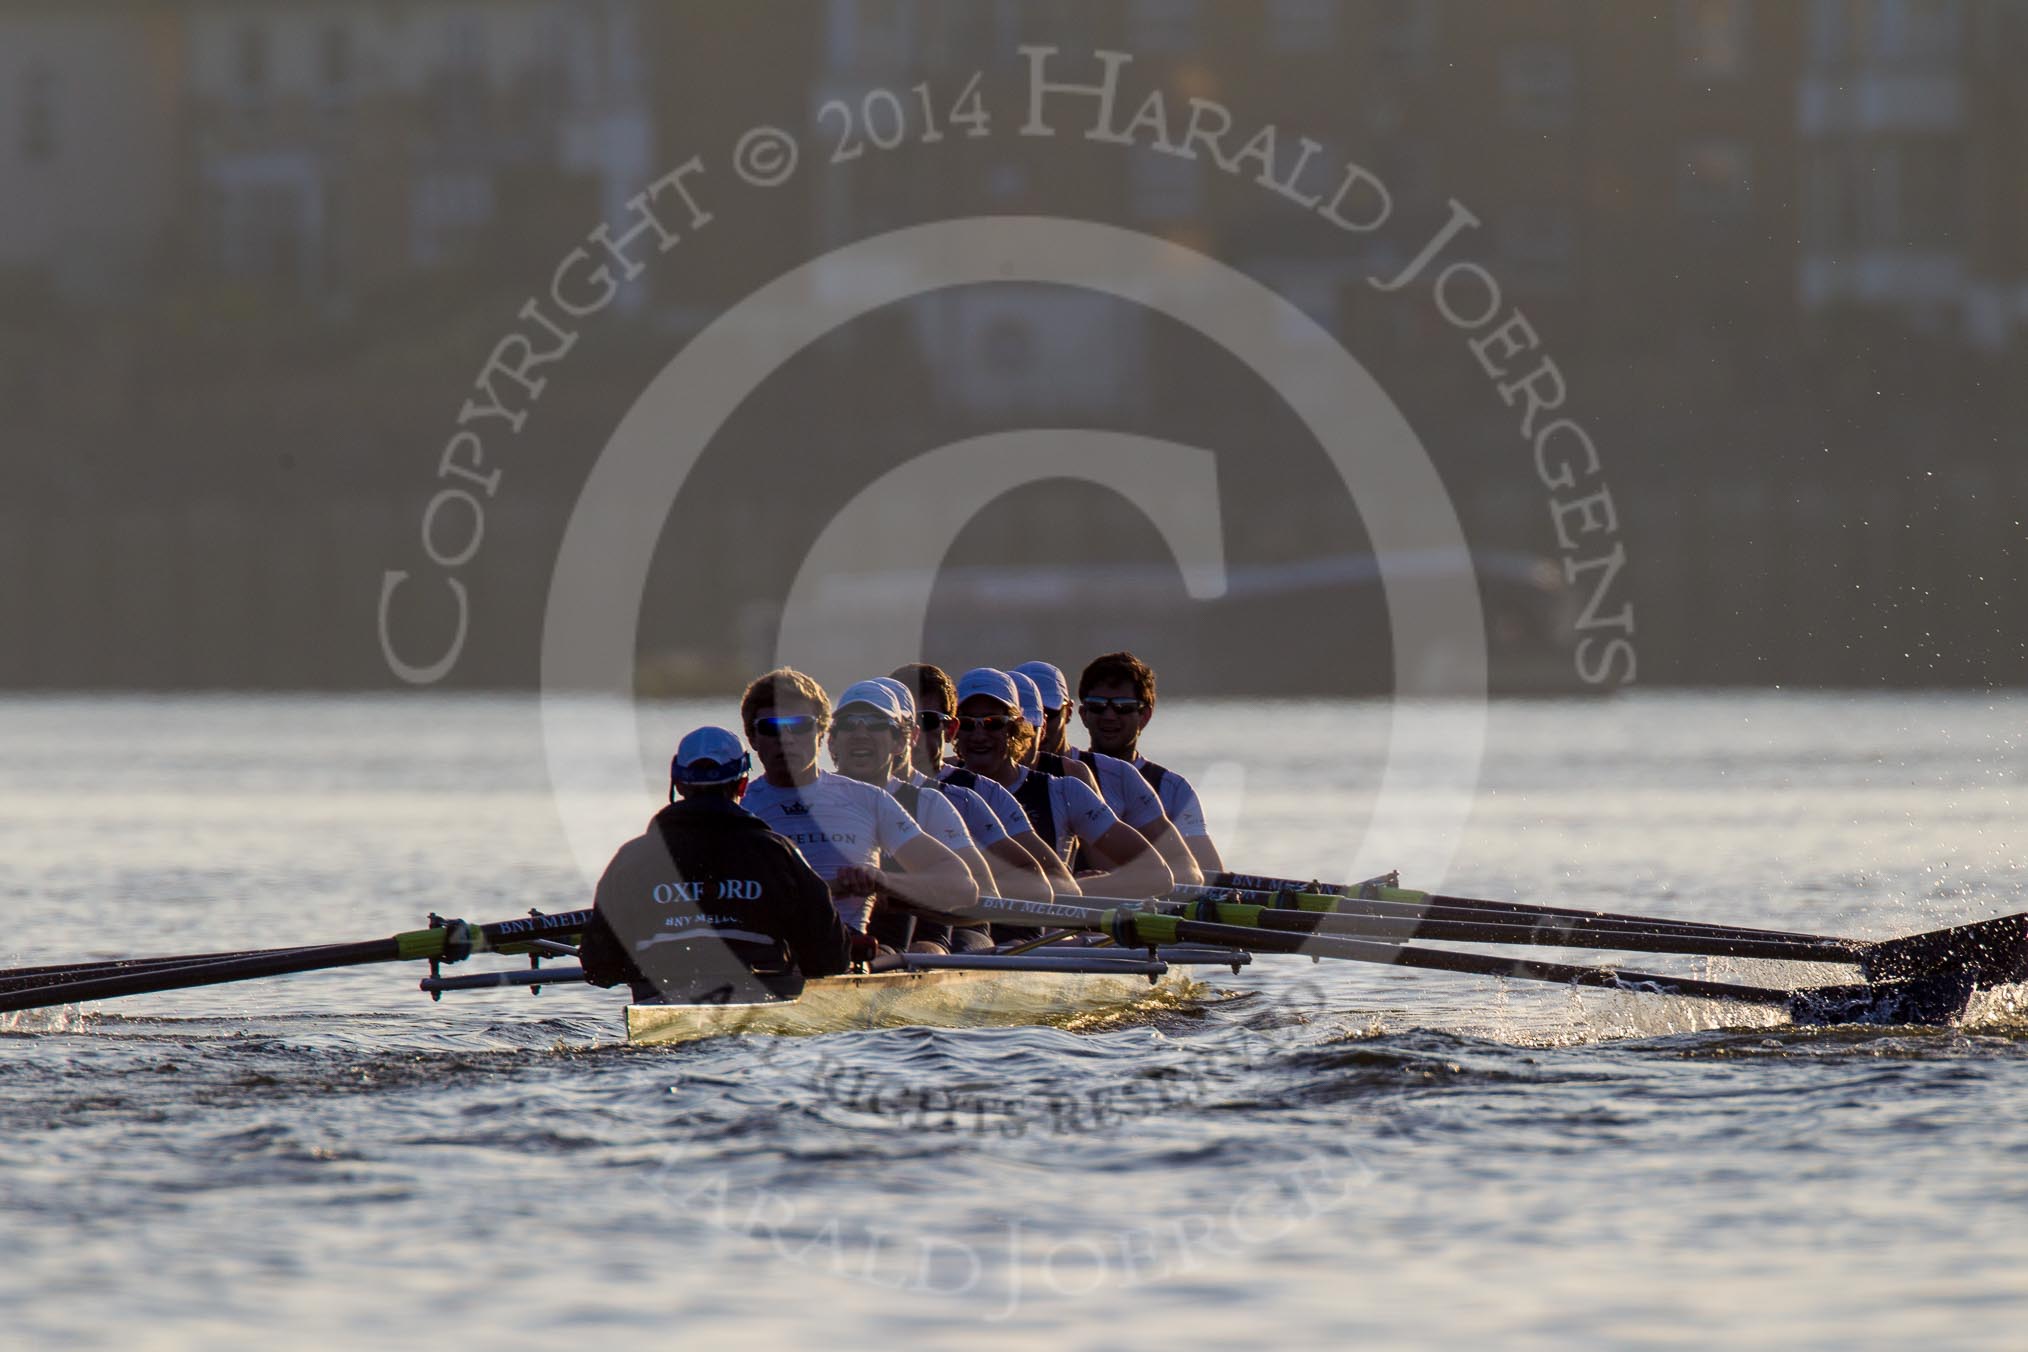 The Boat Race season 2014 - fixture OUBC vs German U23: The OUBC boat in the low evening sun..
River Thames between Putney Bridge and Chiswick Bridge,



on 08 March 2014 at 16:56, image #151